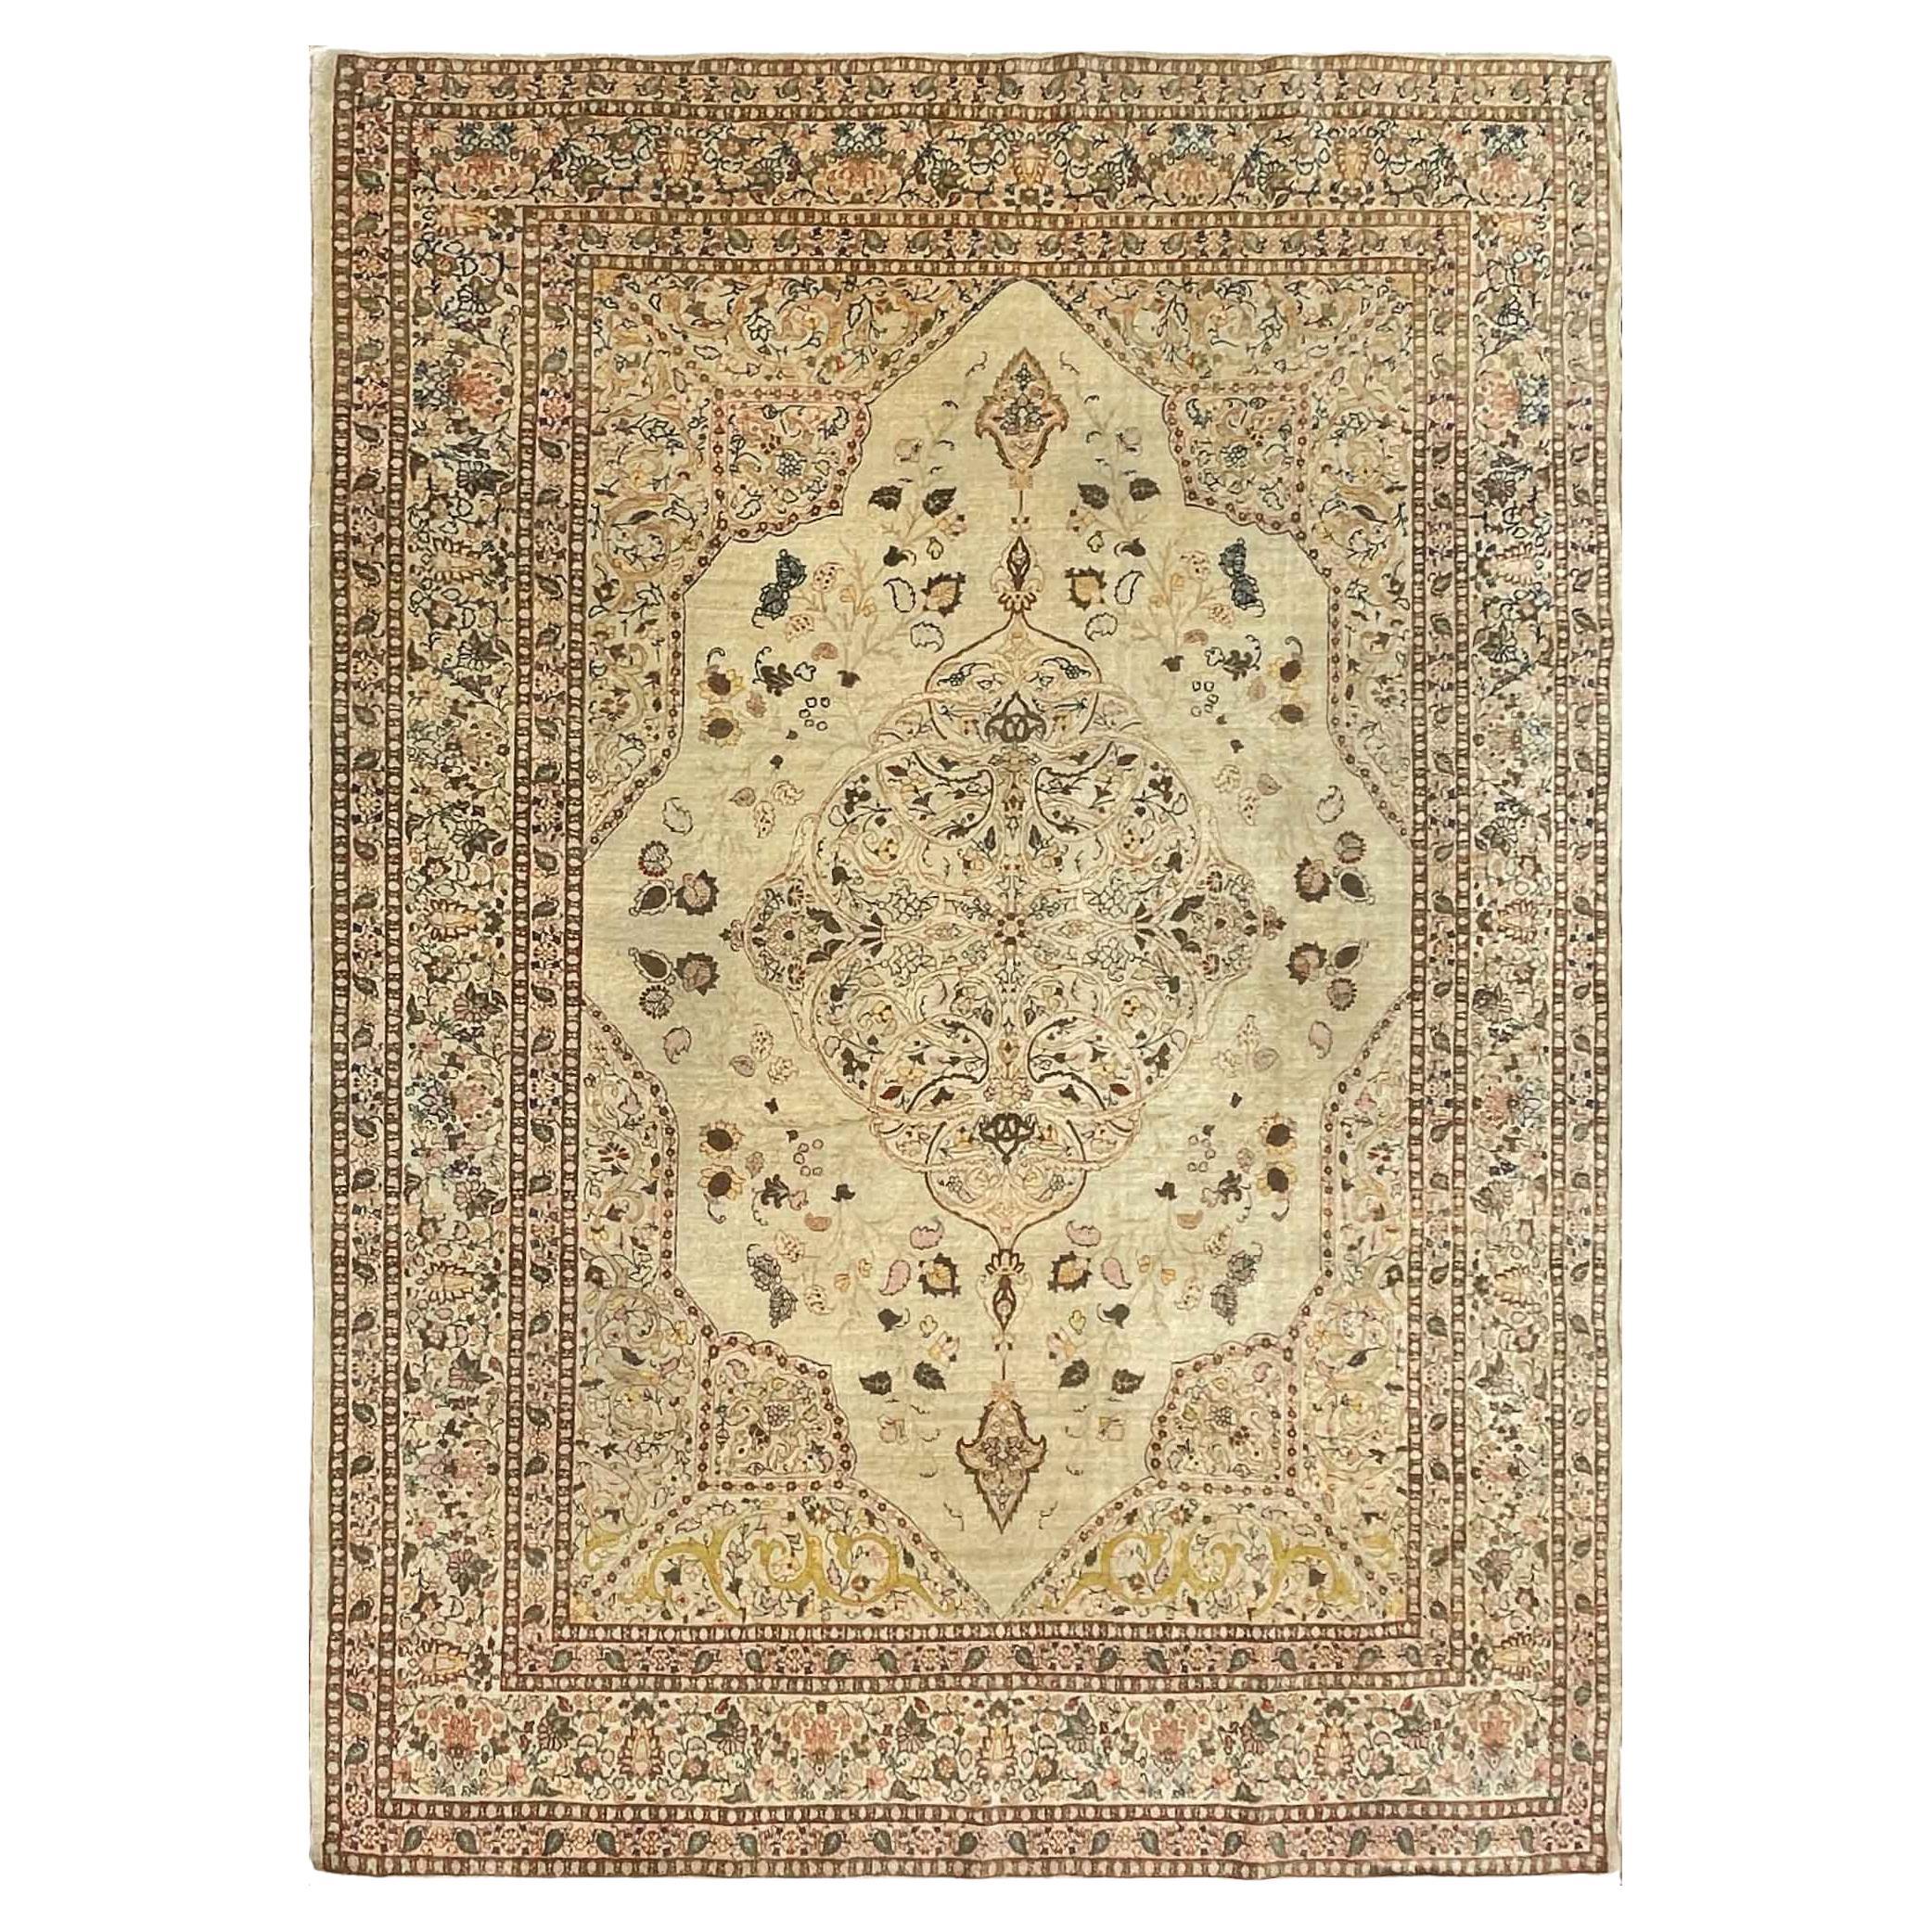 Antique Persian Tabriz Hajji Jalili Carpet, The Best Of Persian Rugs For Sale